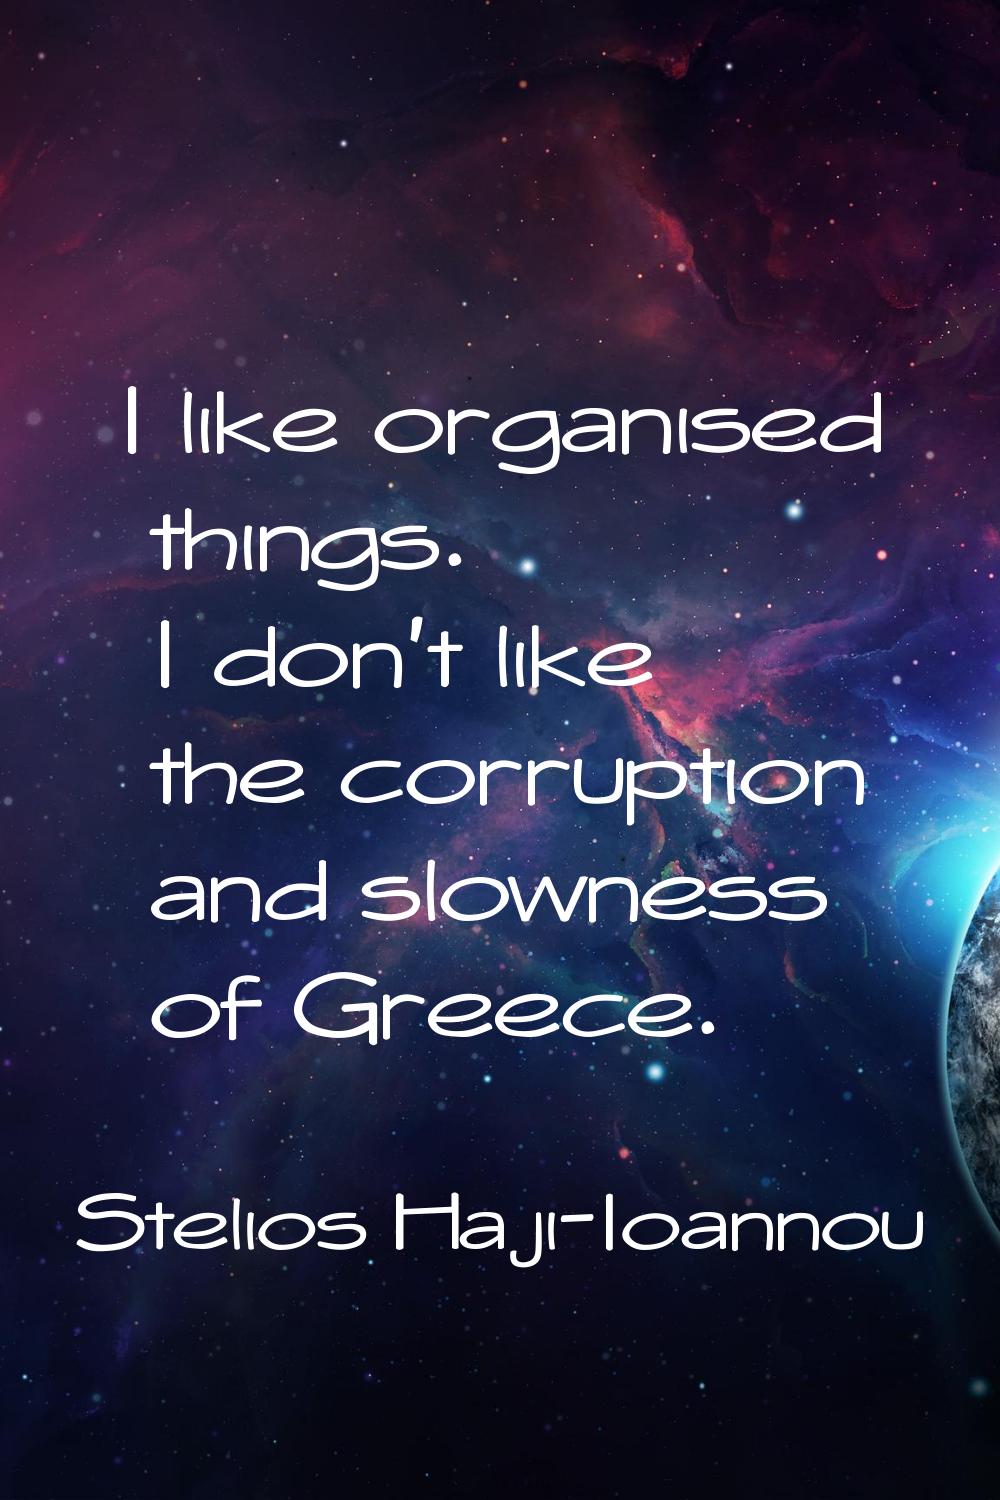 I like organised things. I don't like the corruption and slowness of Greece.